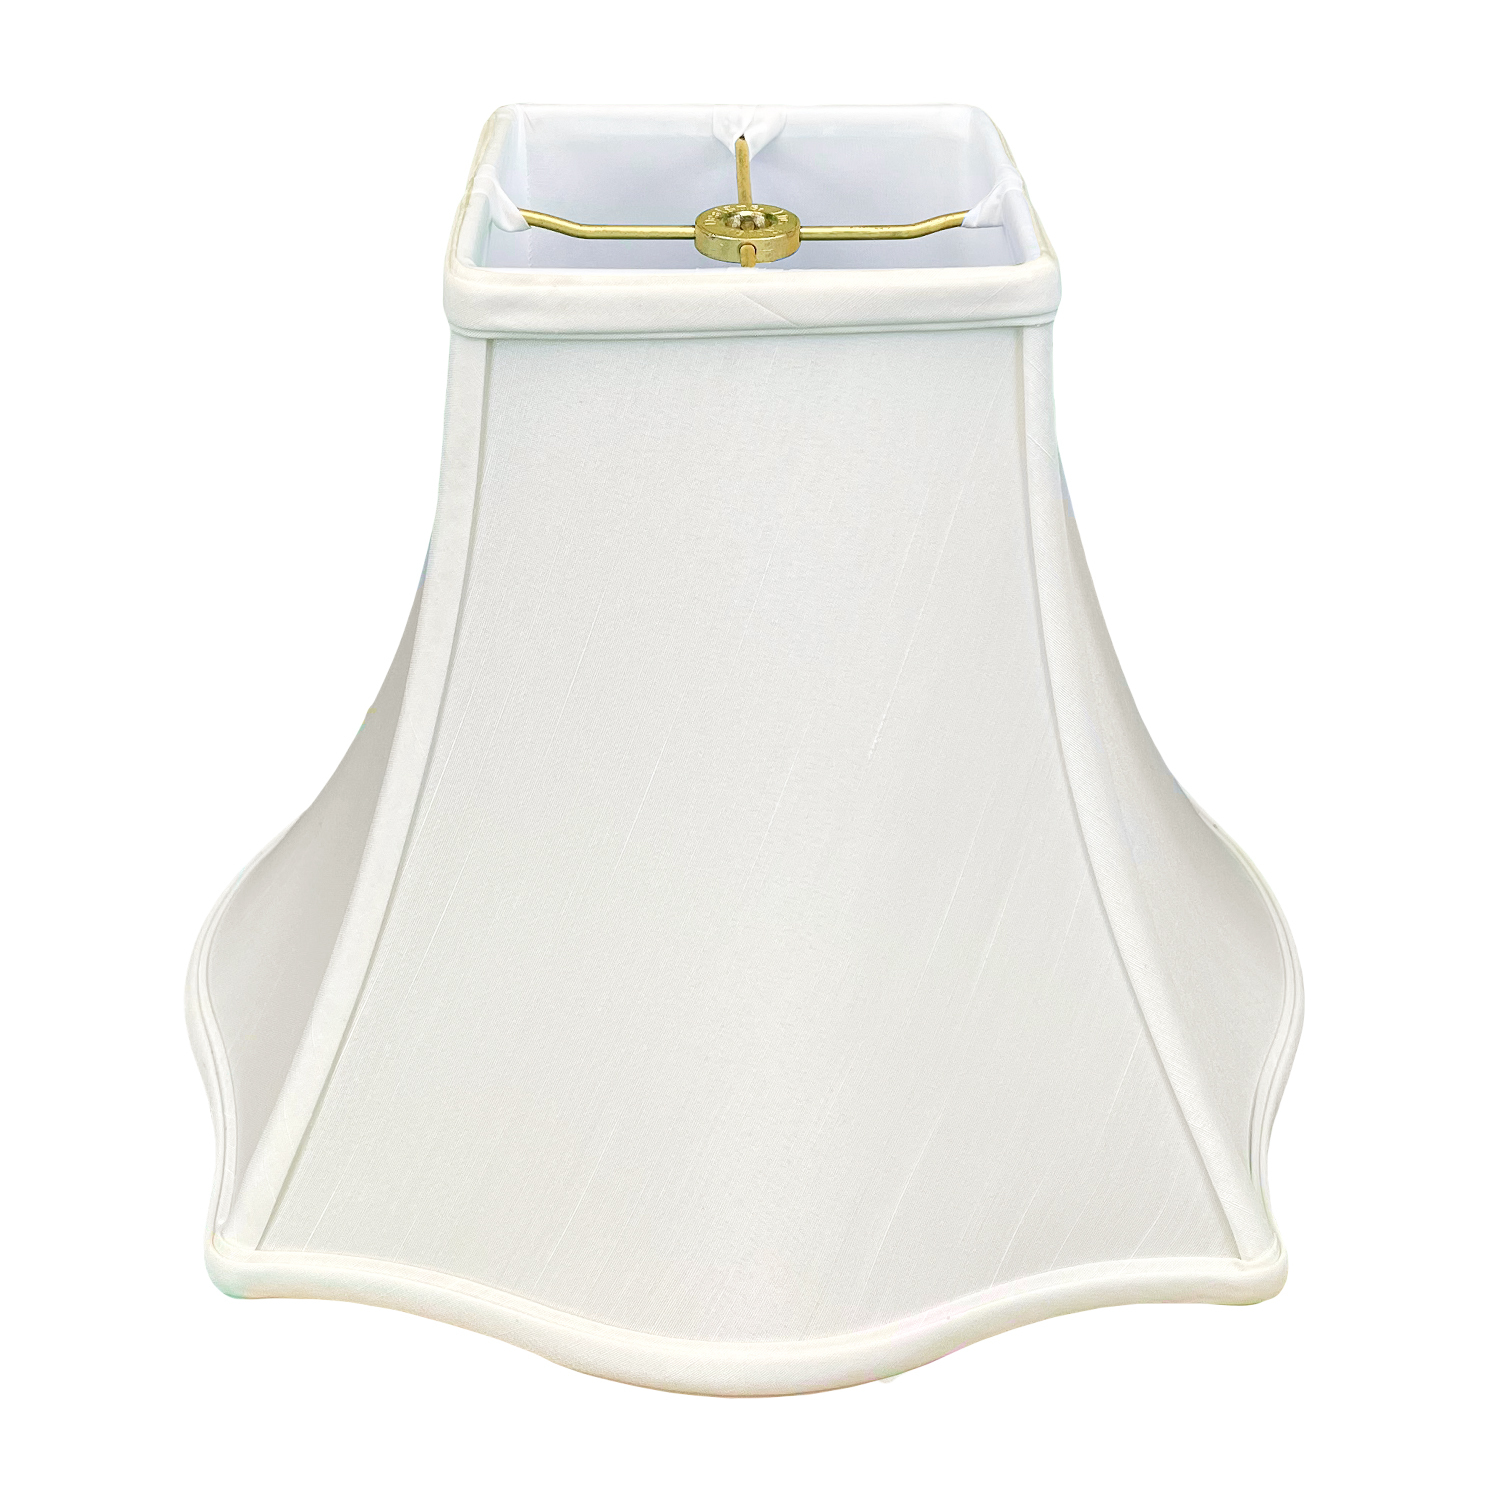 Royal Designs Fancy Square Bell Basic Lamp Shade, White, 6 x 14 x 11.5